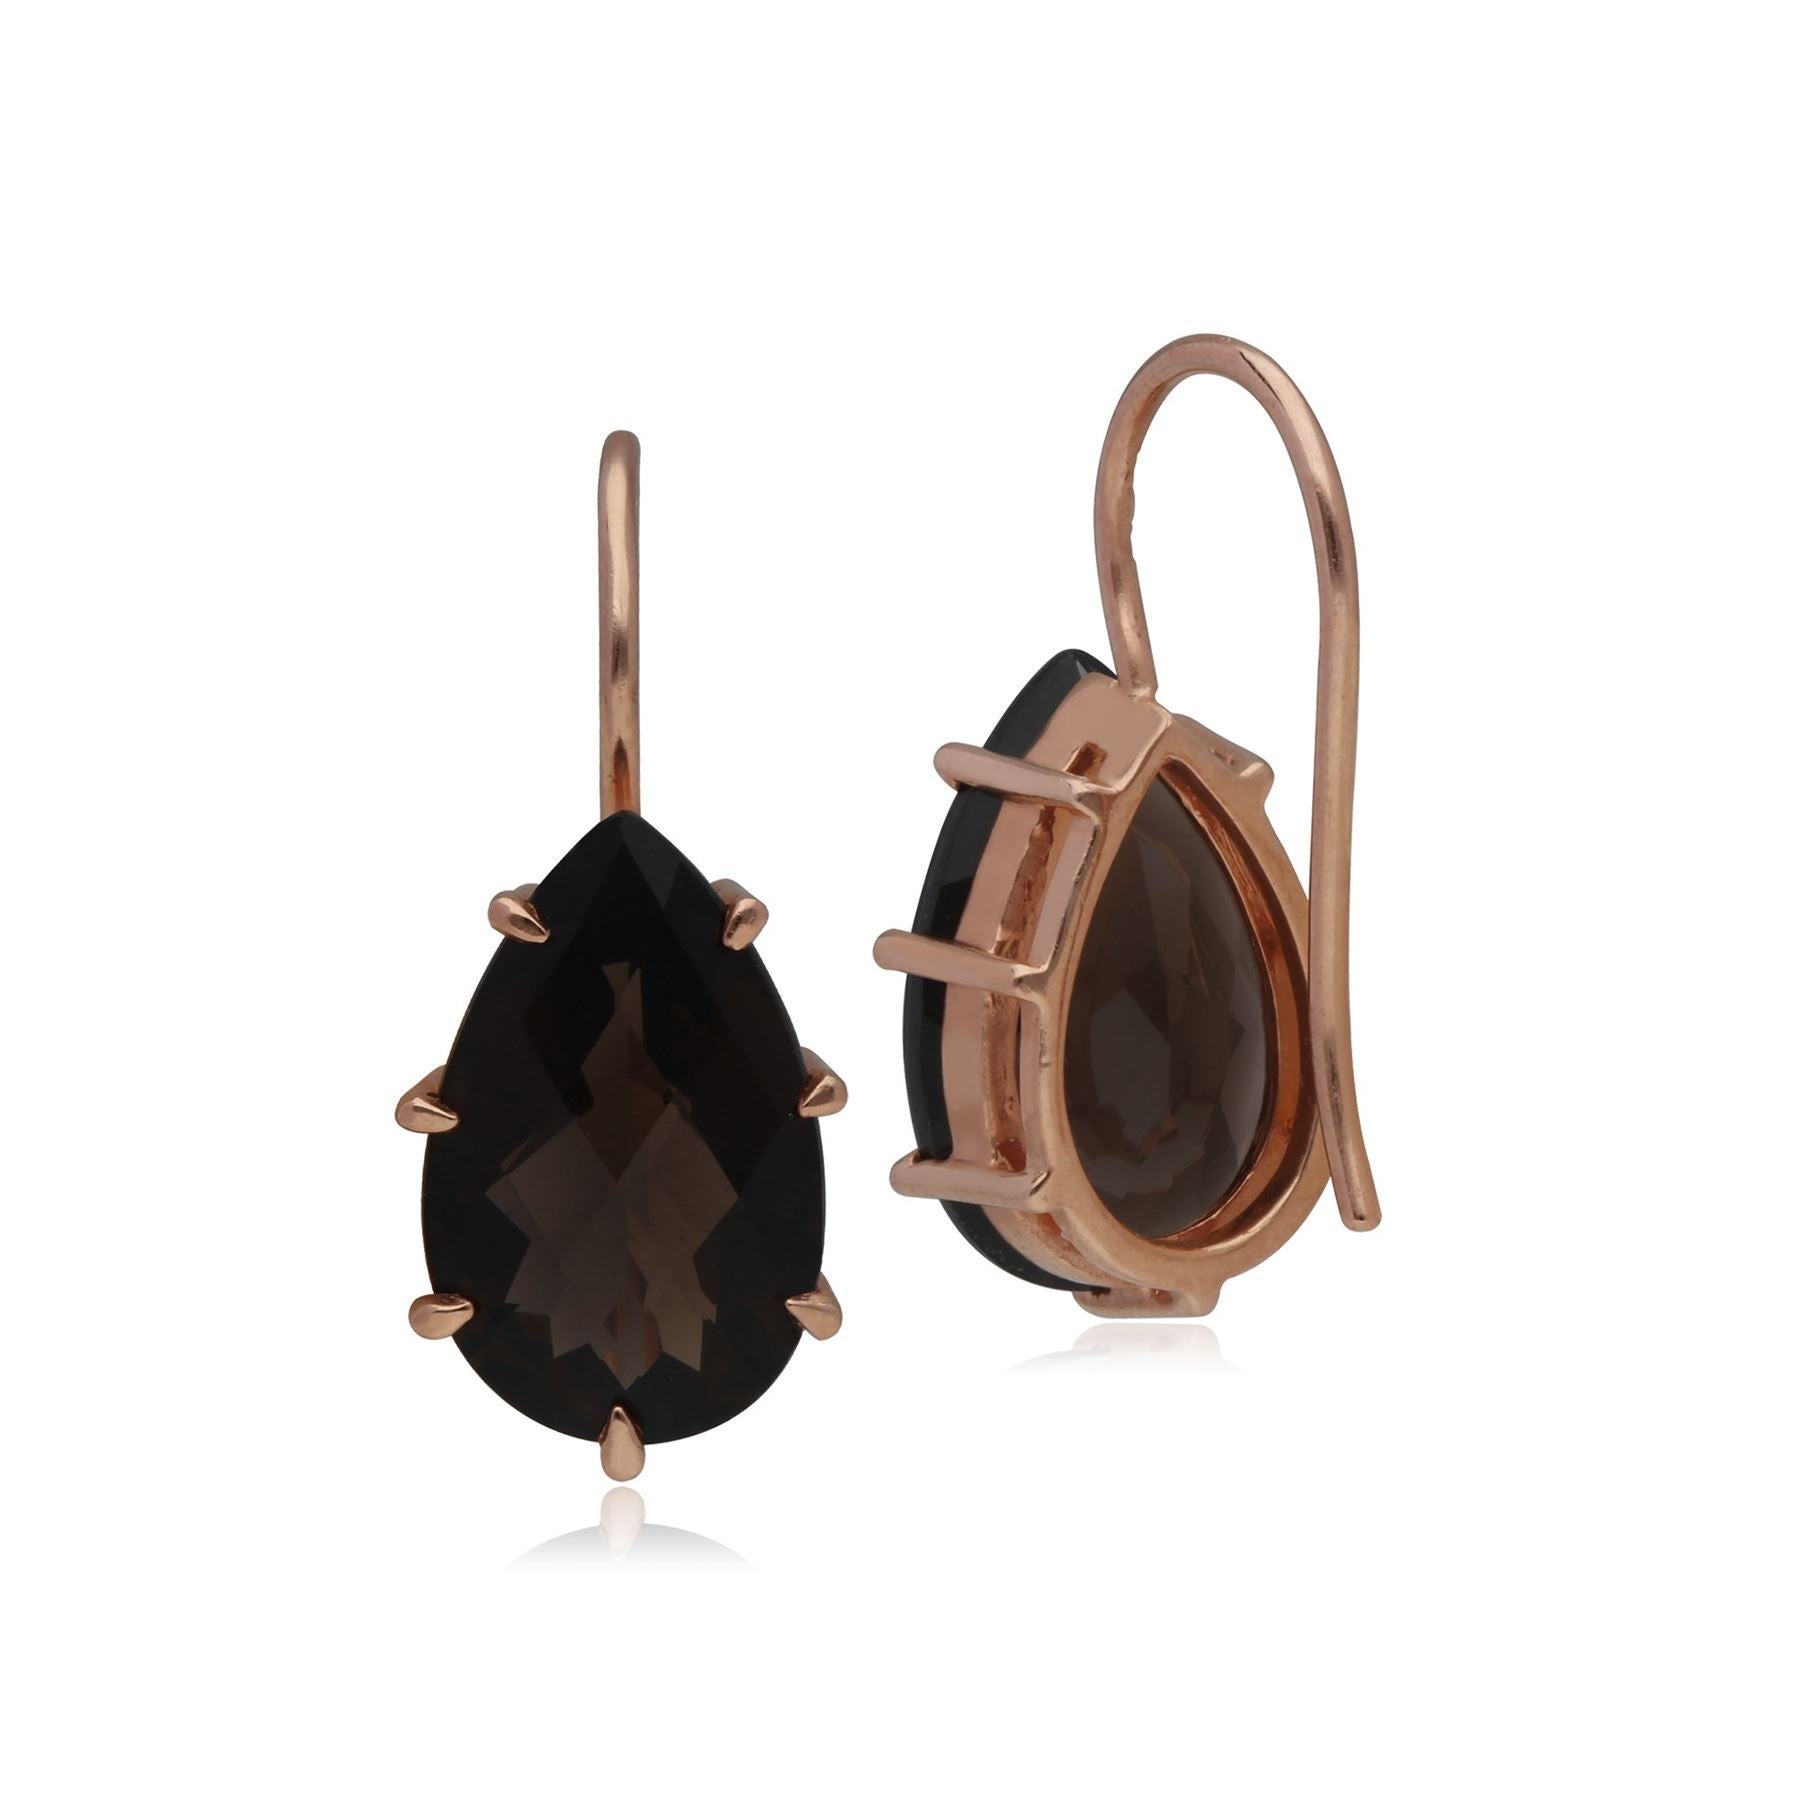 Kosmos Smokey Quartz Earrings in Rose Gold Plated Sterling Silver